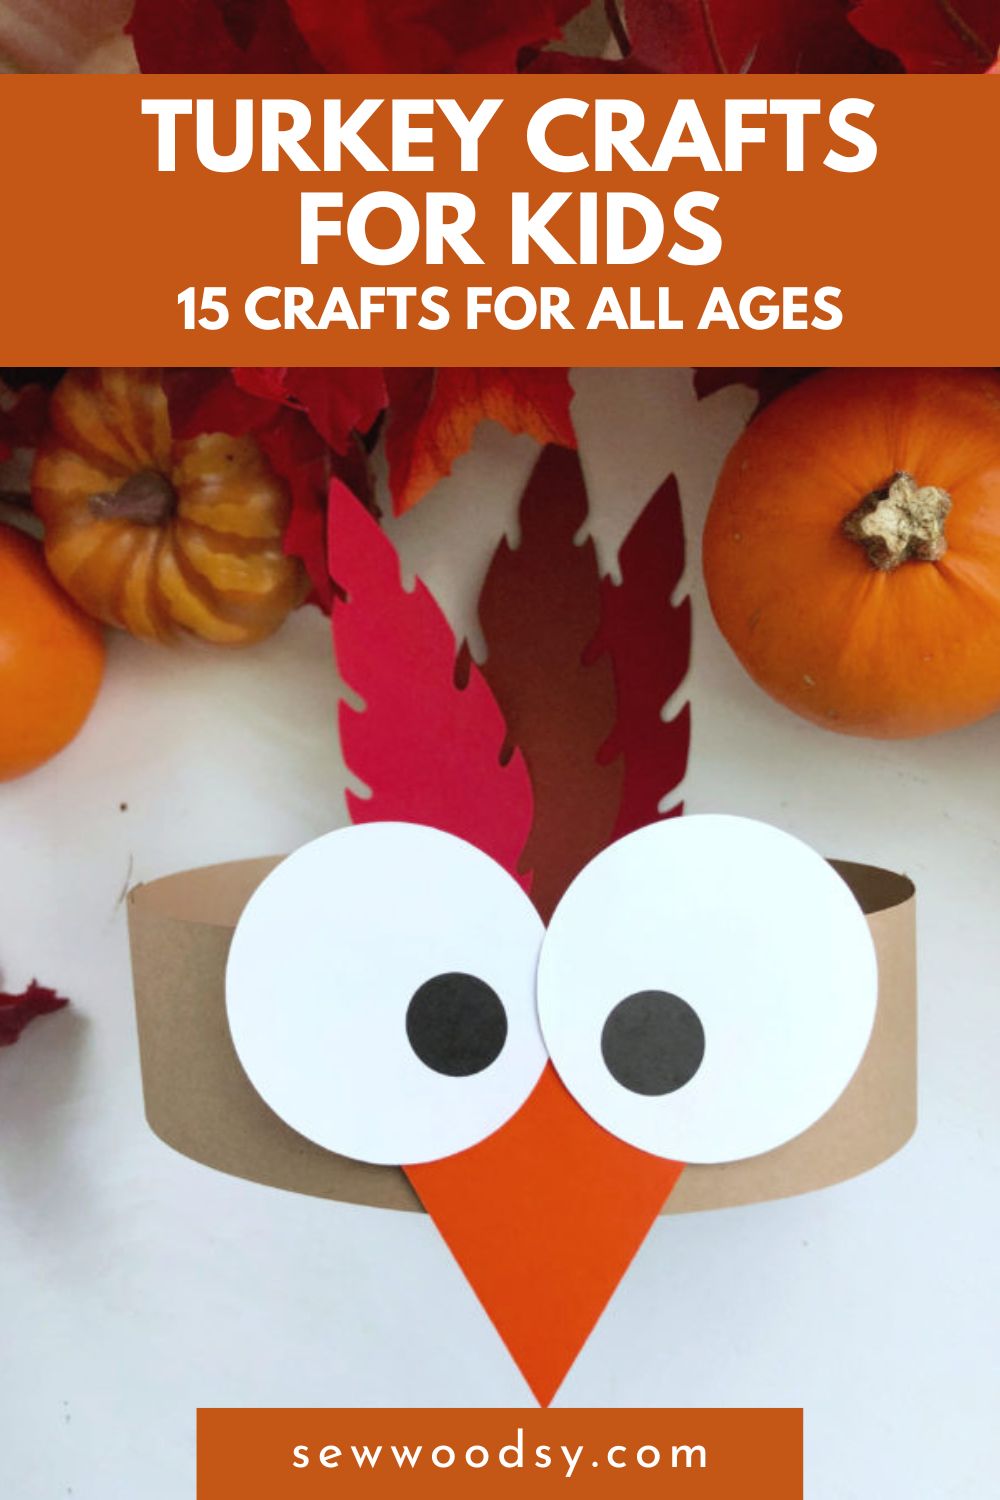 Brown turkey paper headband with eyes with text on image for Pinterest.